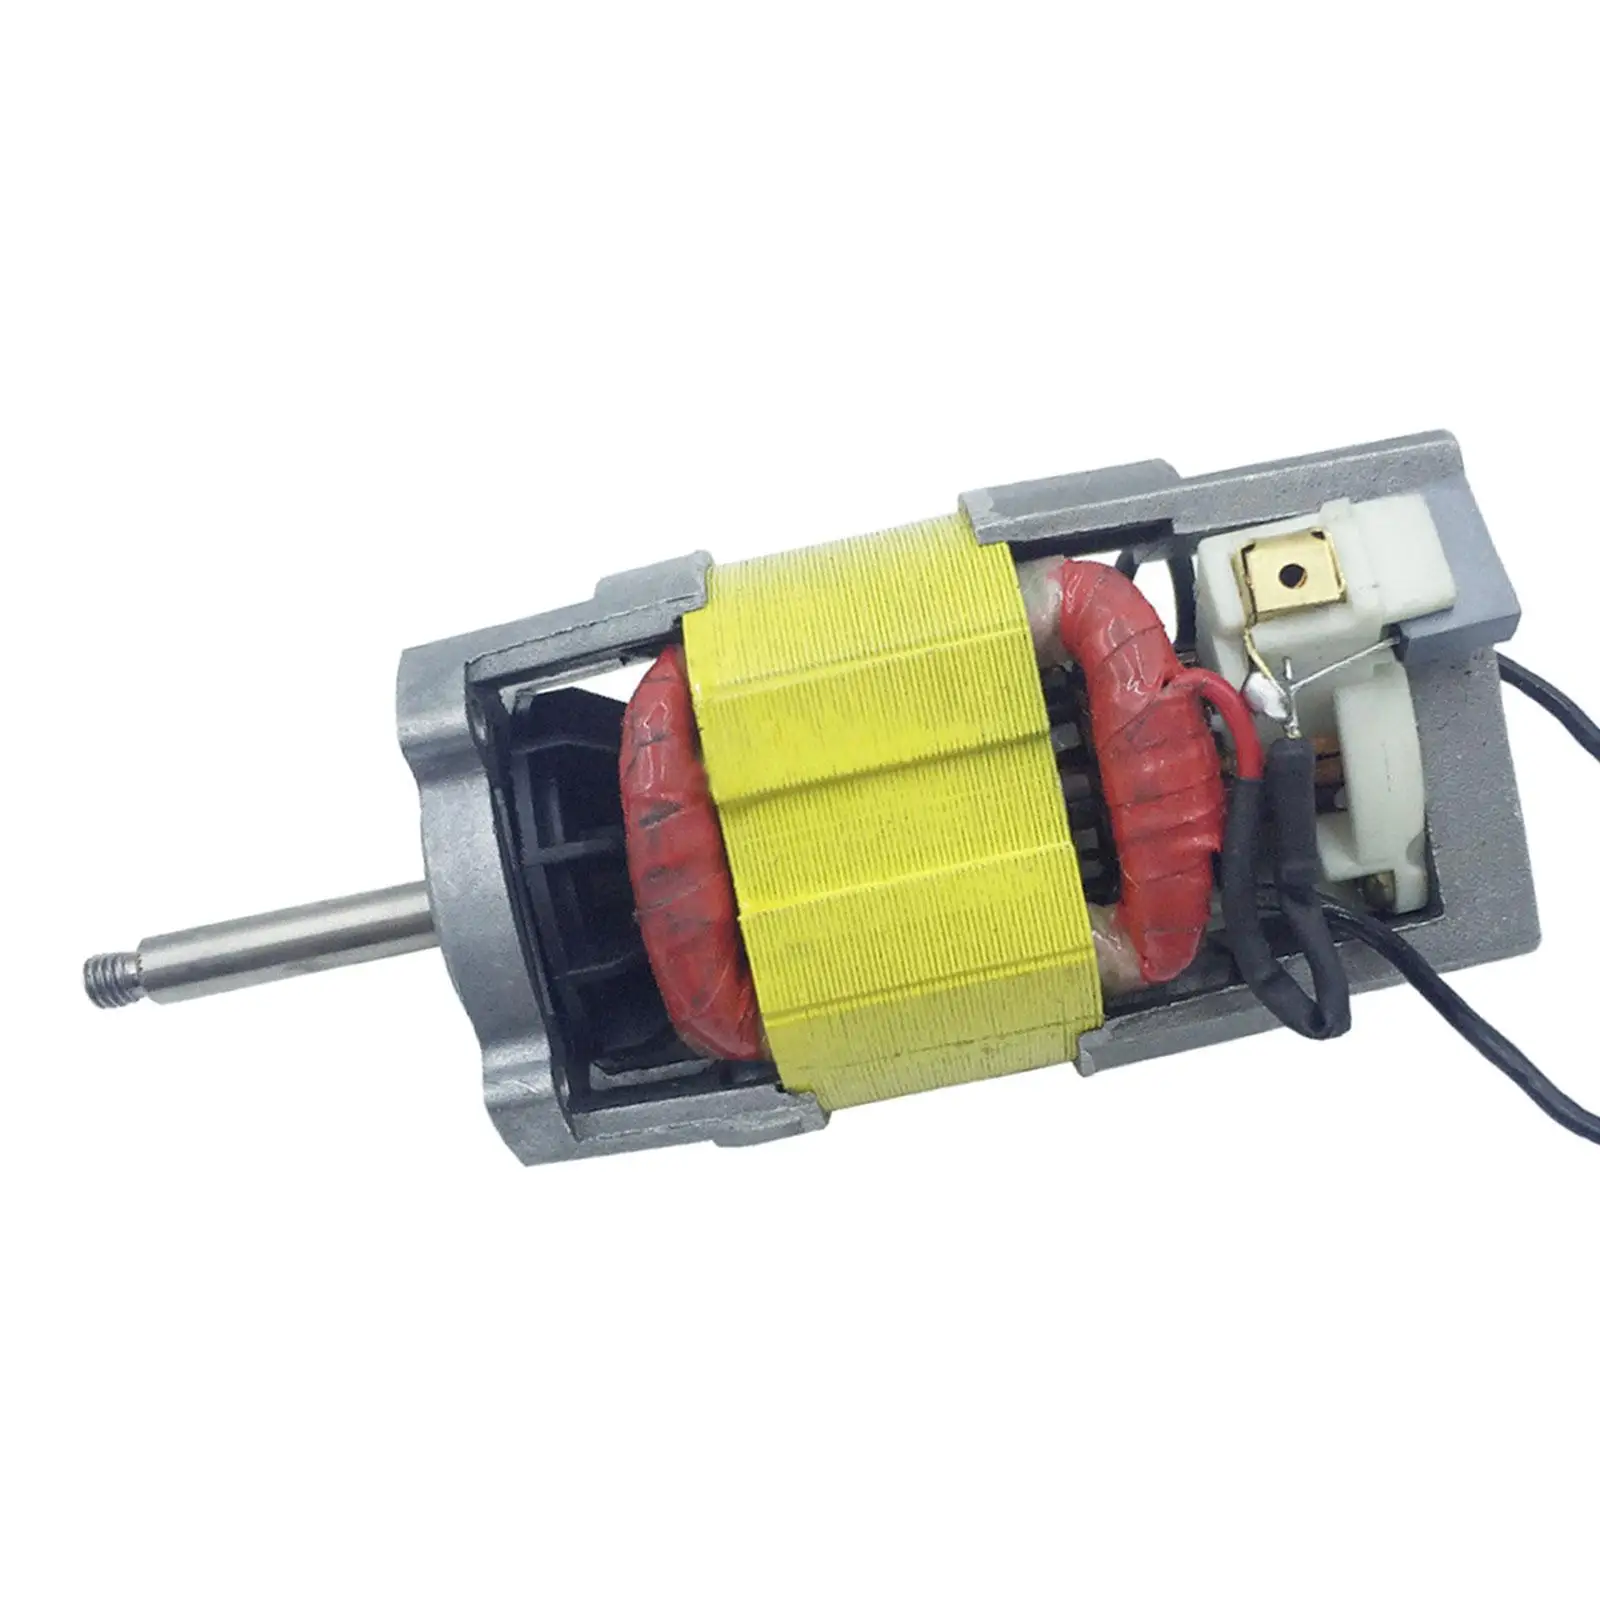 Hot Air Heat Blower Motor Pure Copper Wire Material Good Sealing Durable 1600W Electric Hot Air Motor Hot Air Motor for Crafts